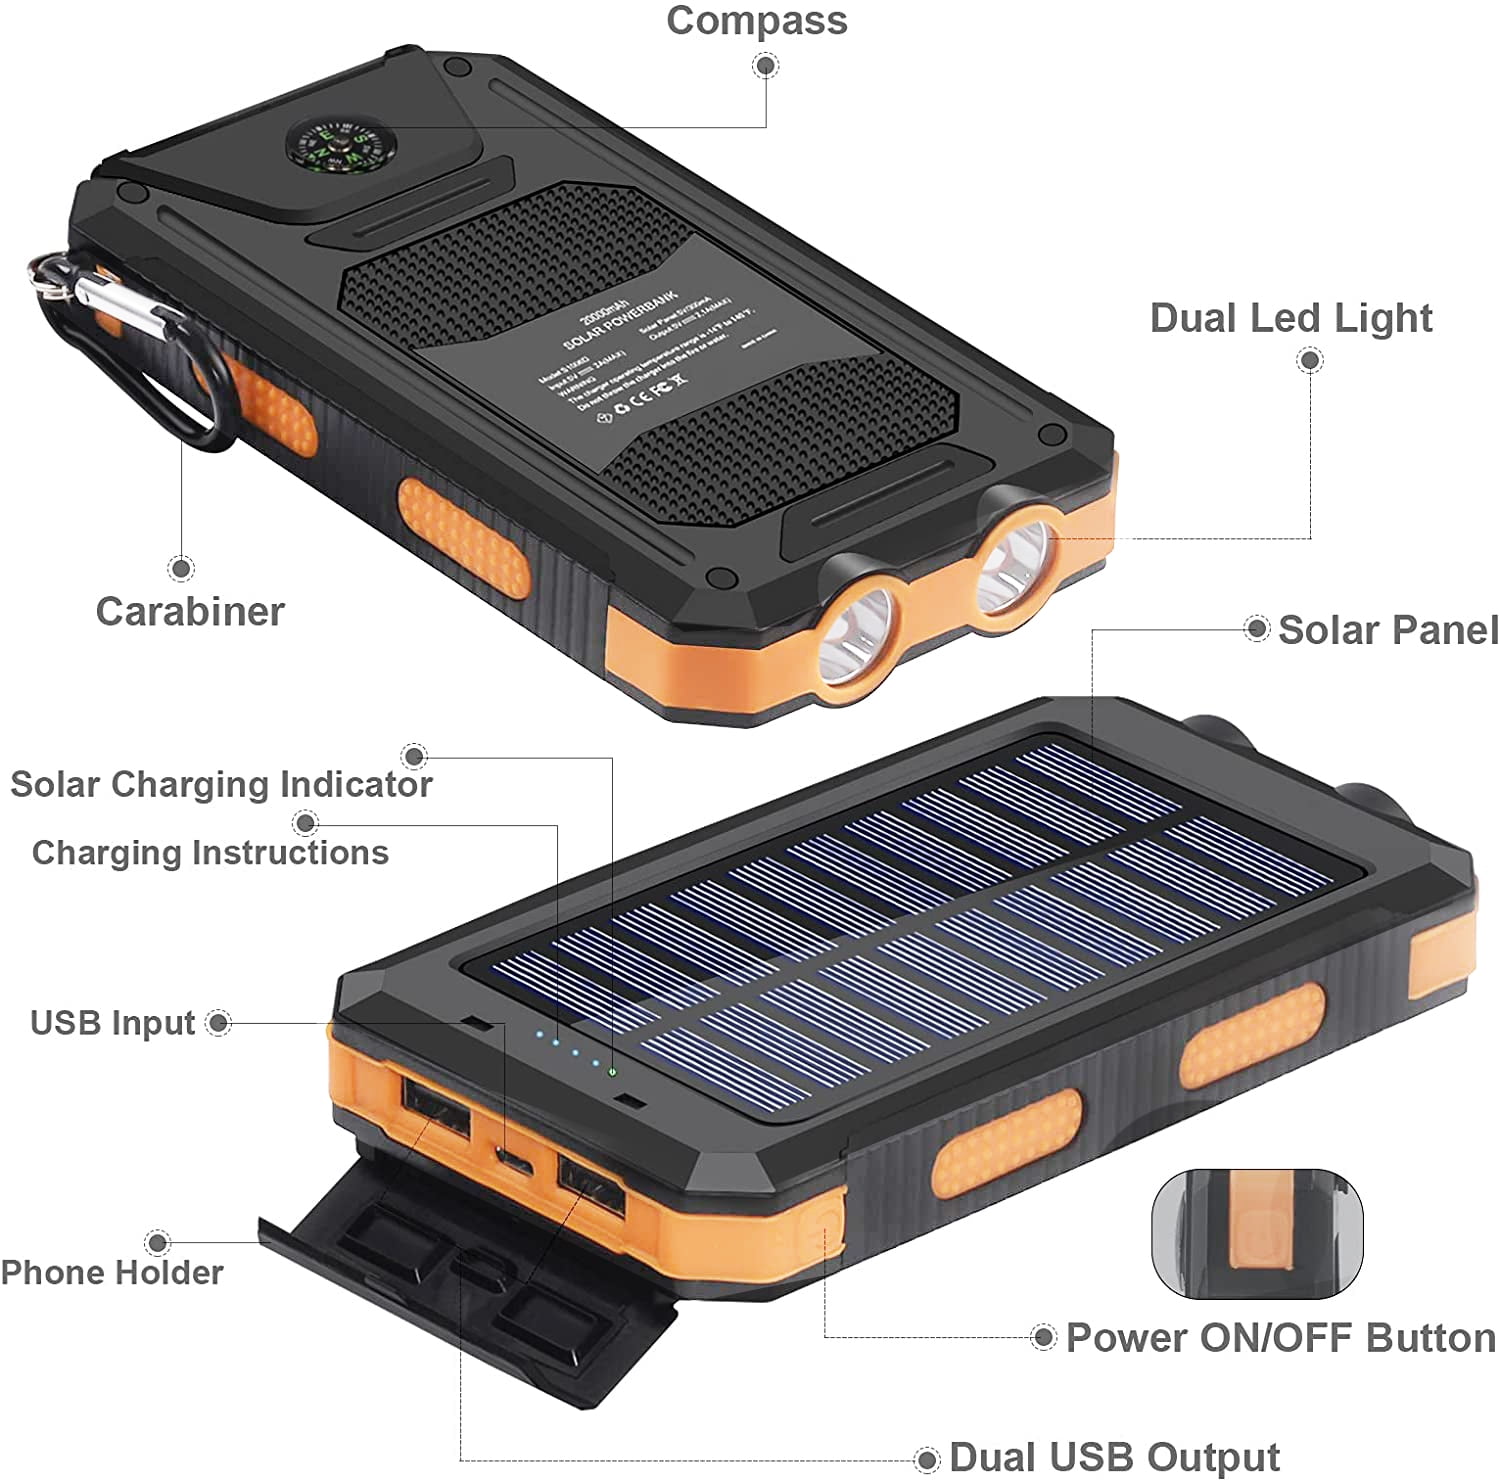 Solar Charger,Solar Power Bank Fast Charging 20000mAh Waterproof Portable  External Backup Battery Pack Charger,Camping Battery Bank with Dual